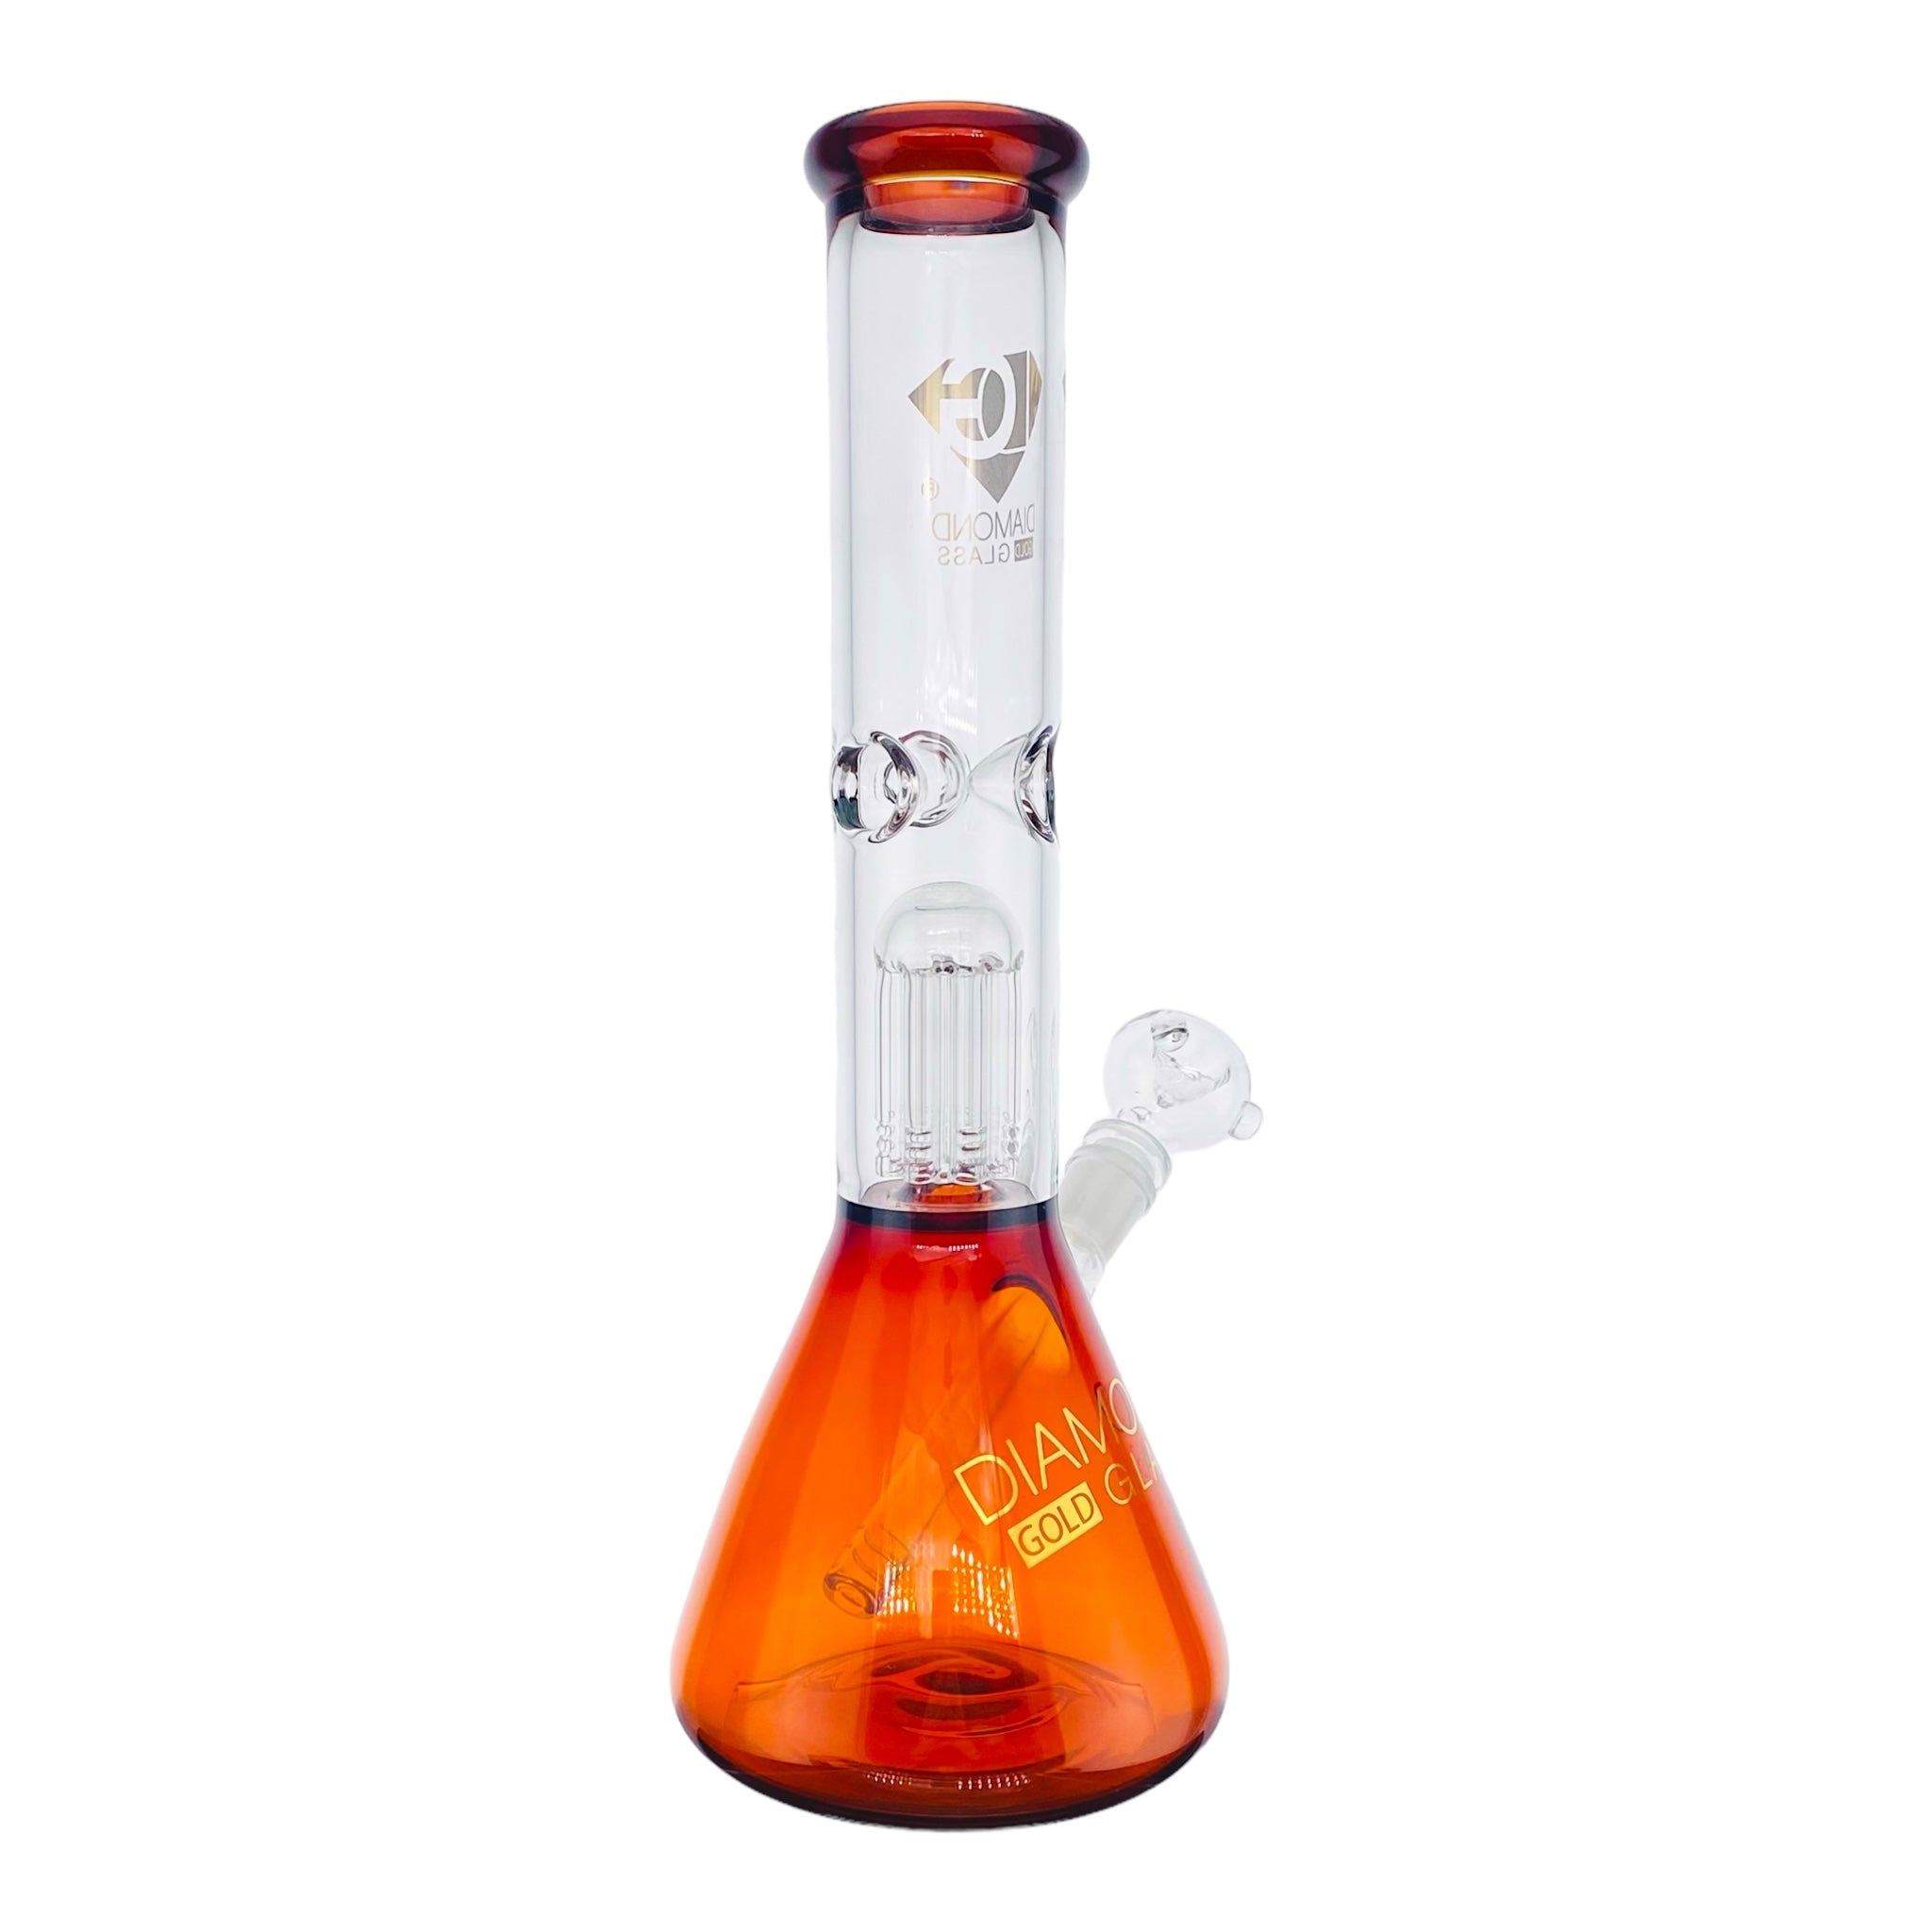 Diamond Glass Bong - Amber Brown 14 Inch Beaker Bong With Tree Perc for sale